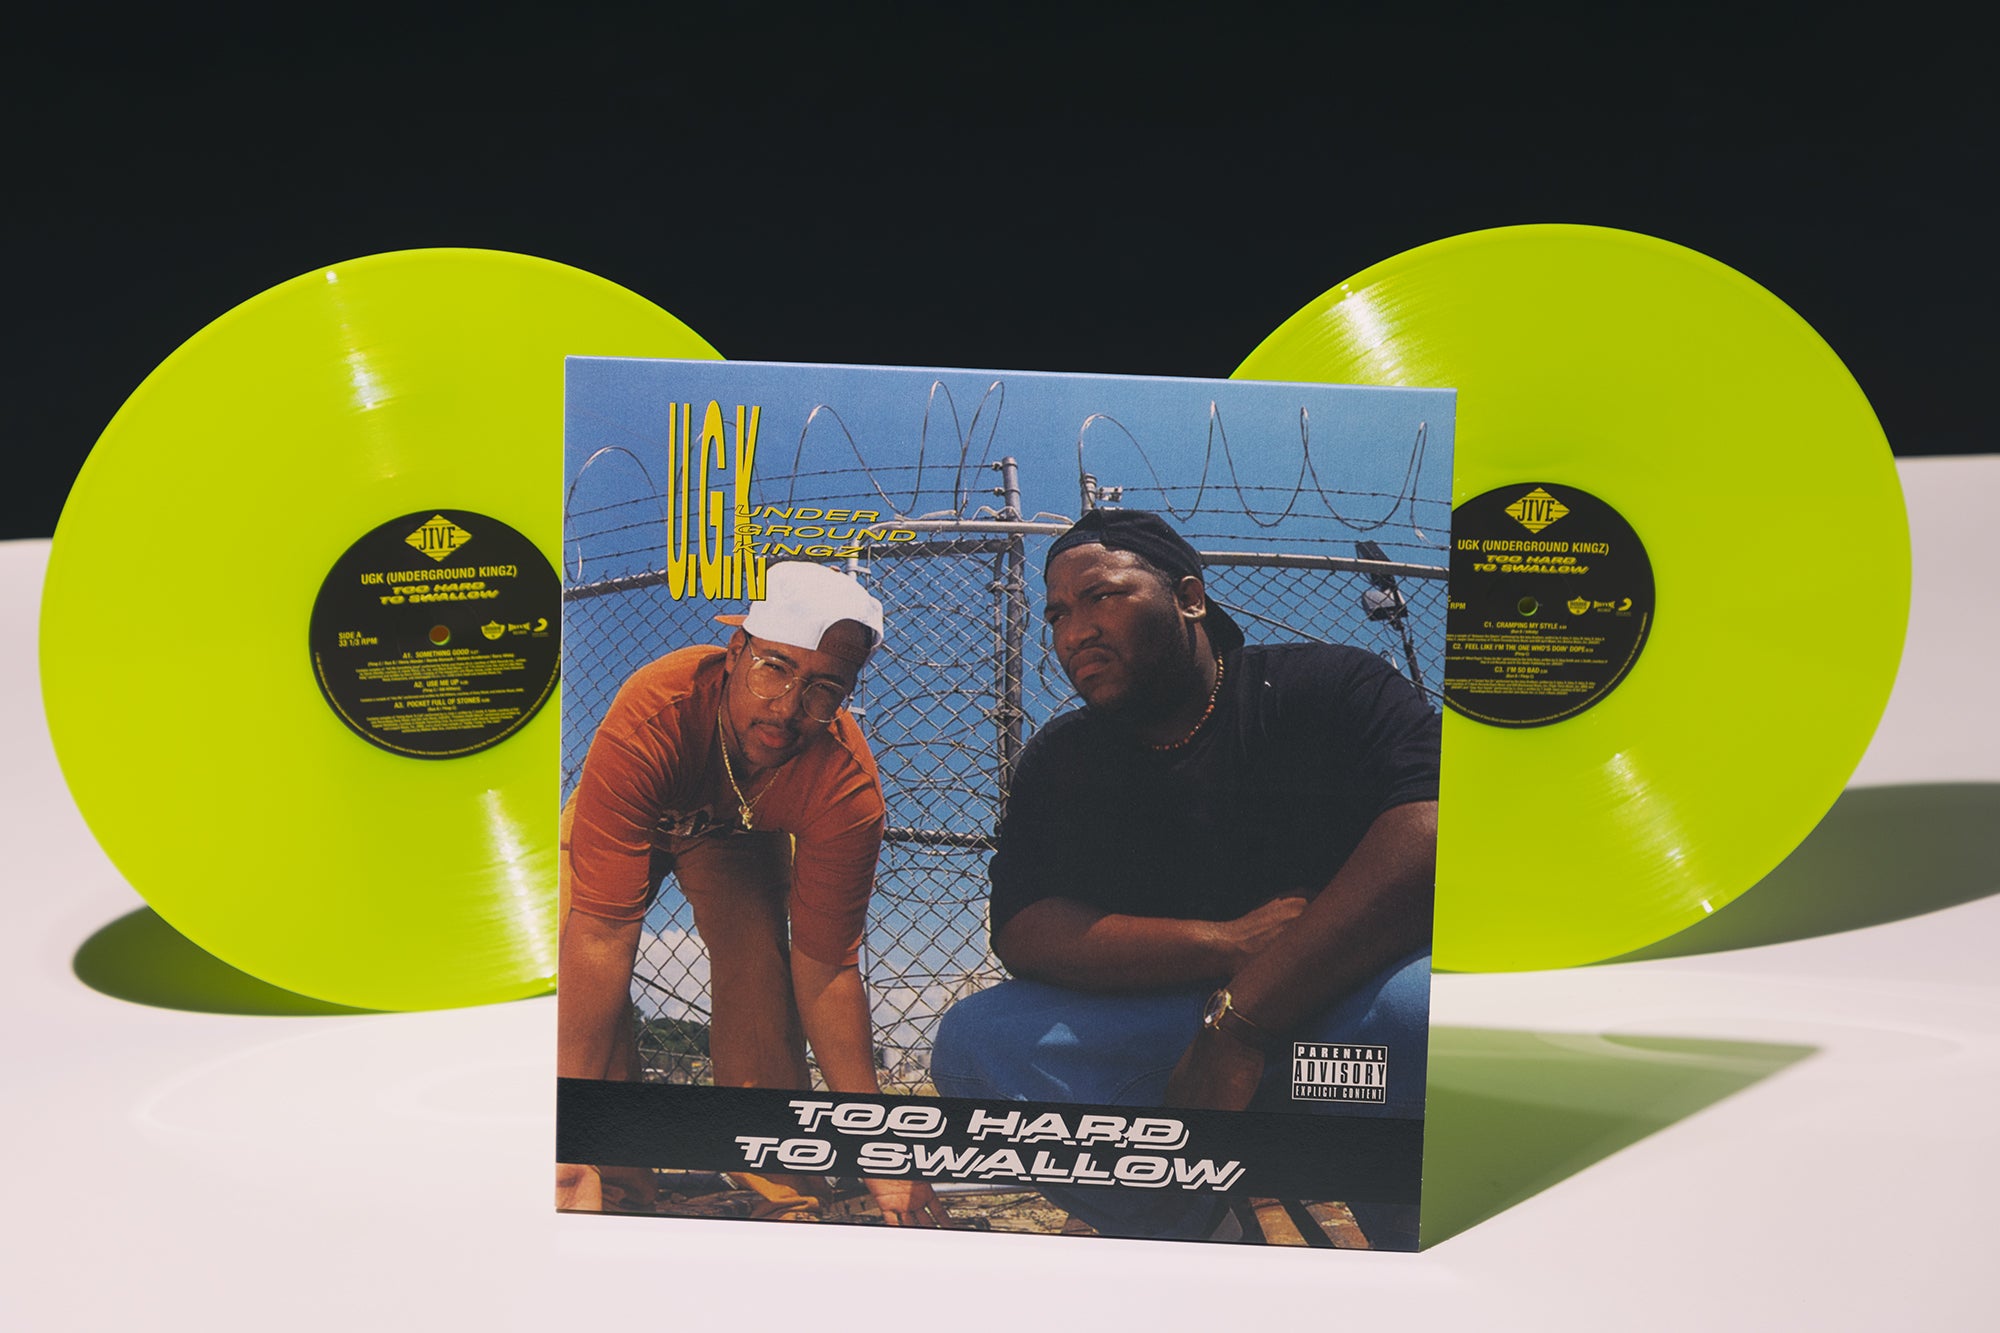 UGK - TO HARD TO SWALLOW 2LP レコード VMP - 洋楽